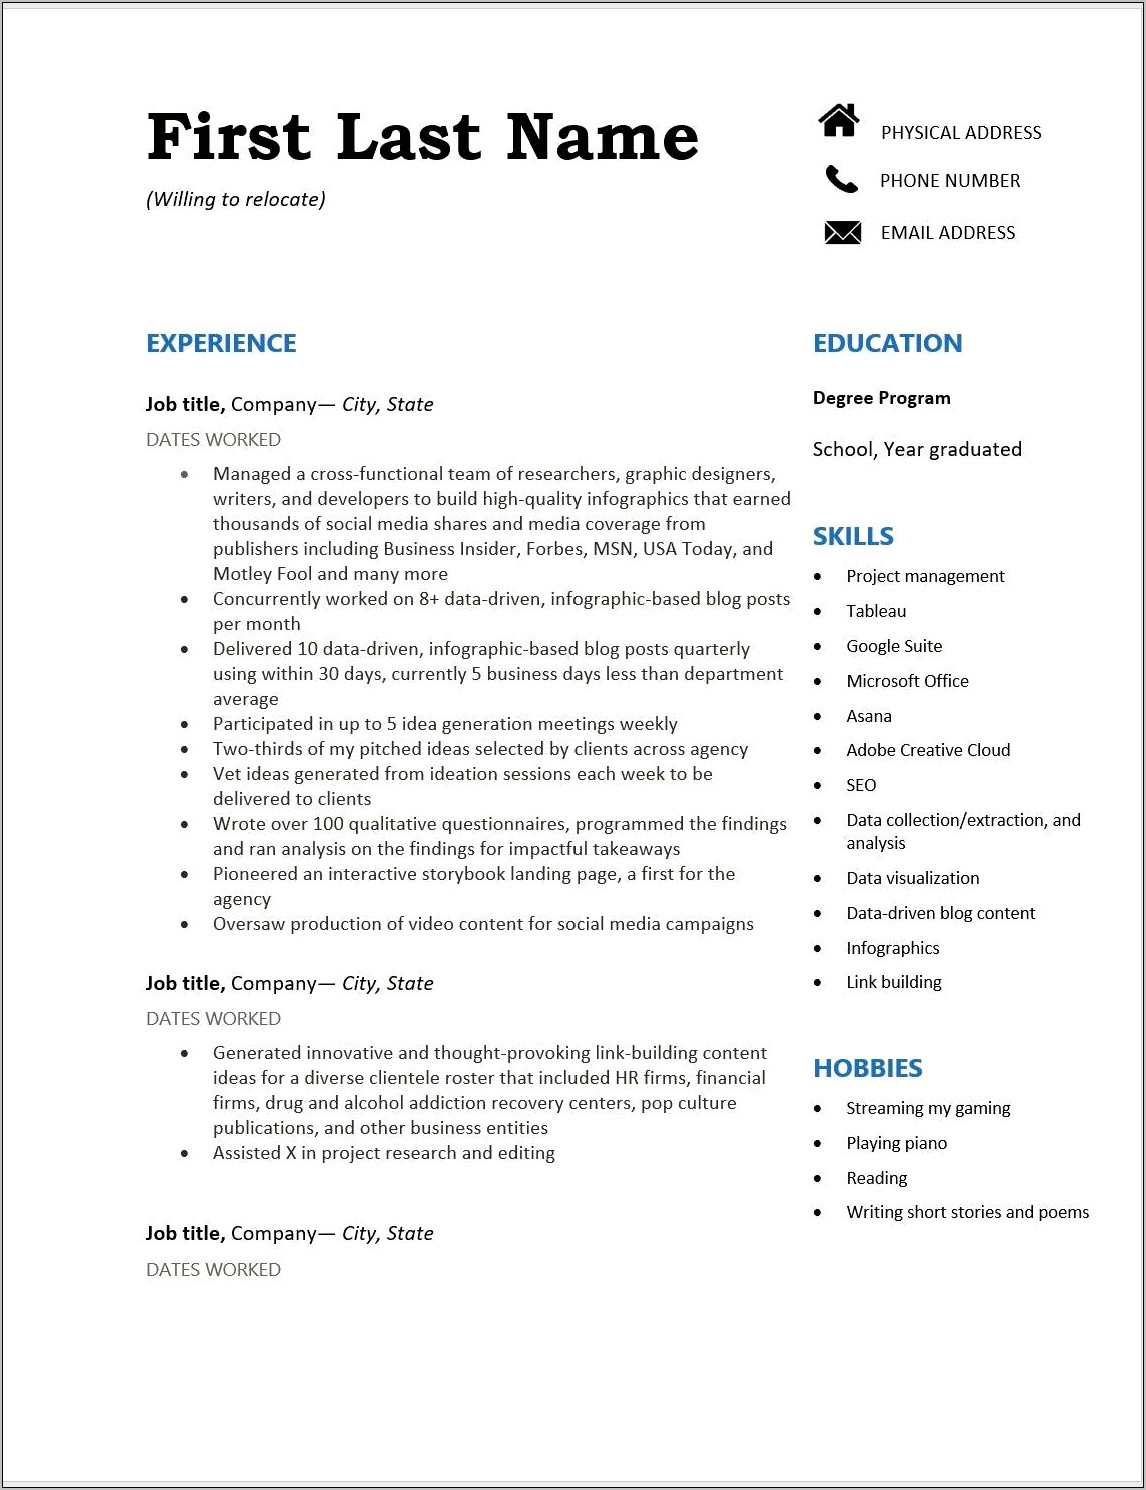 Does Irrelevant Work Experience Carry Weight On Resume